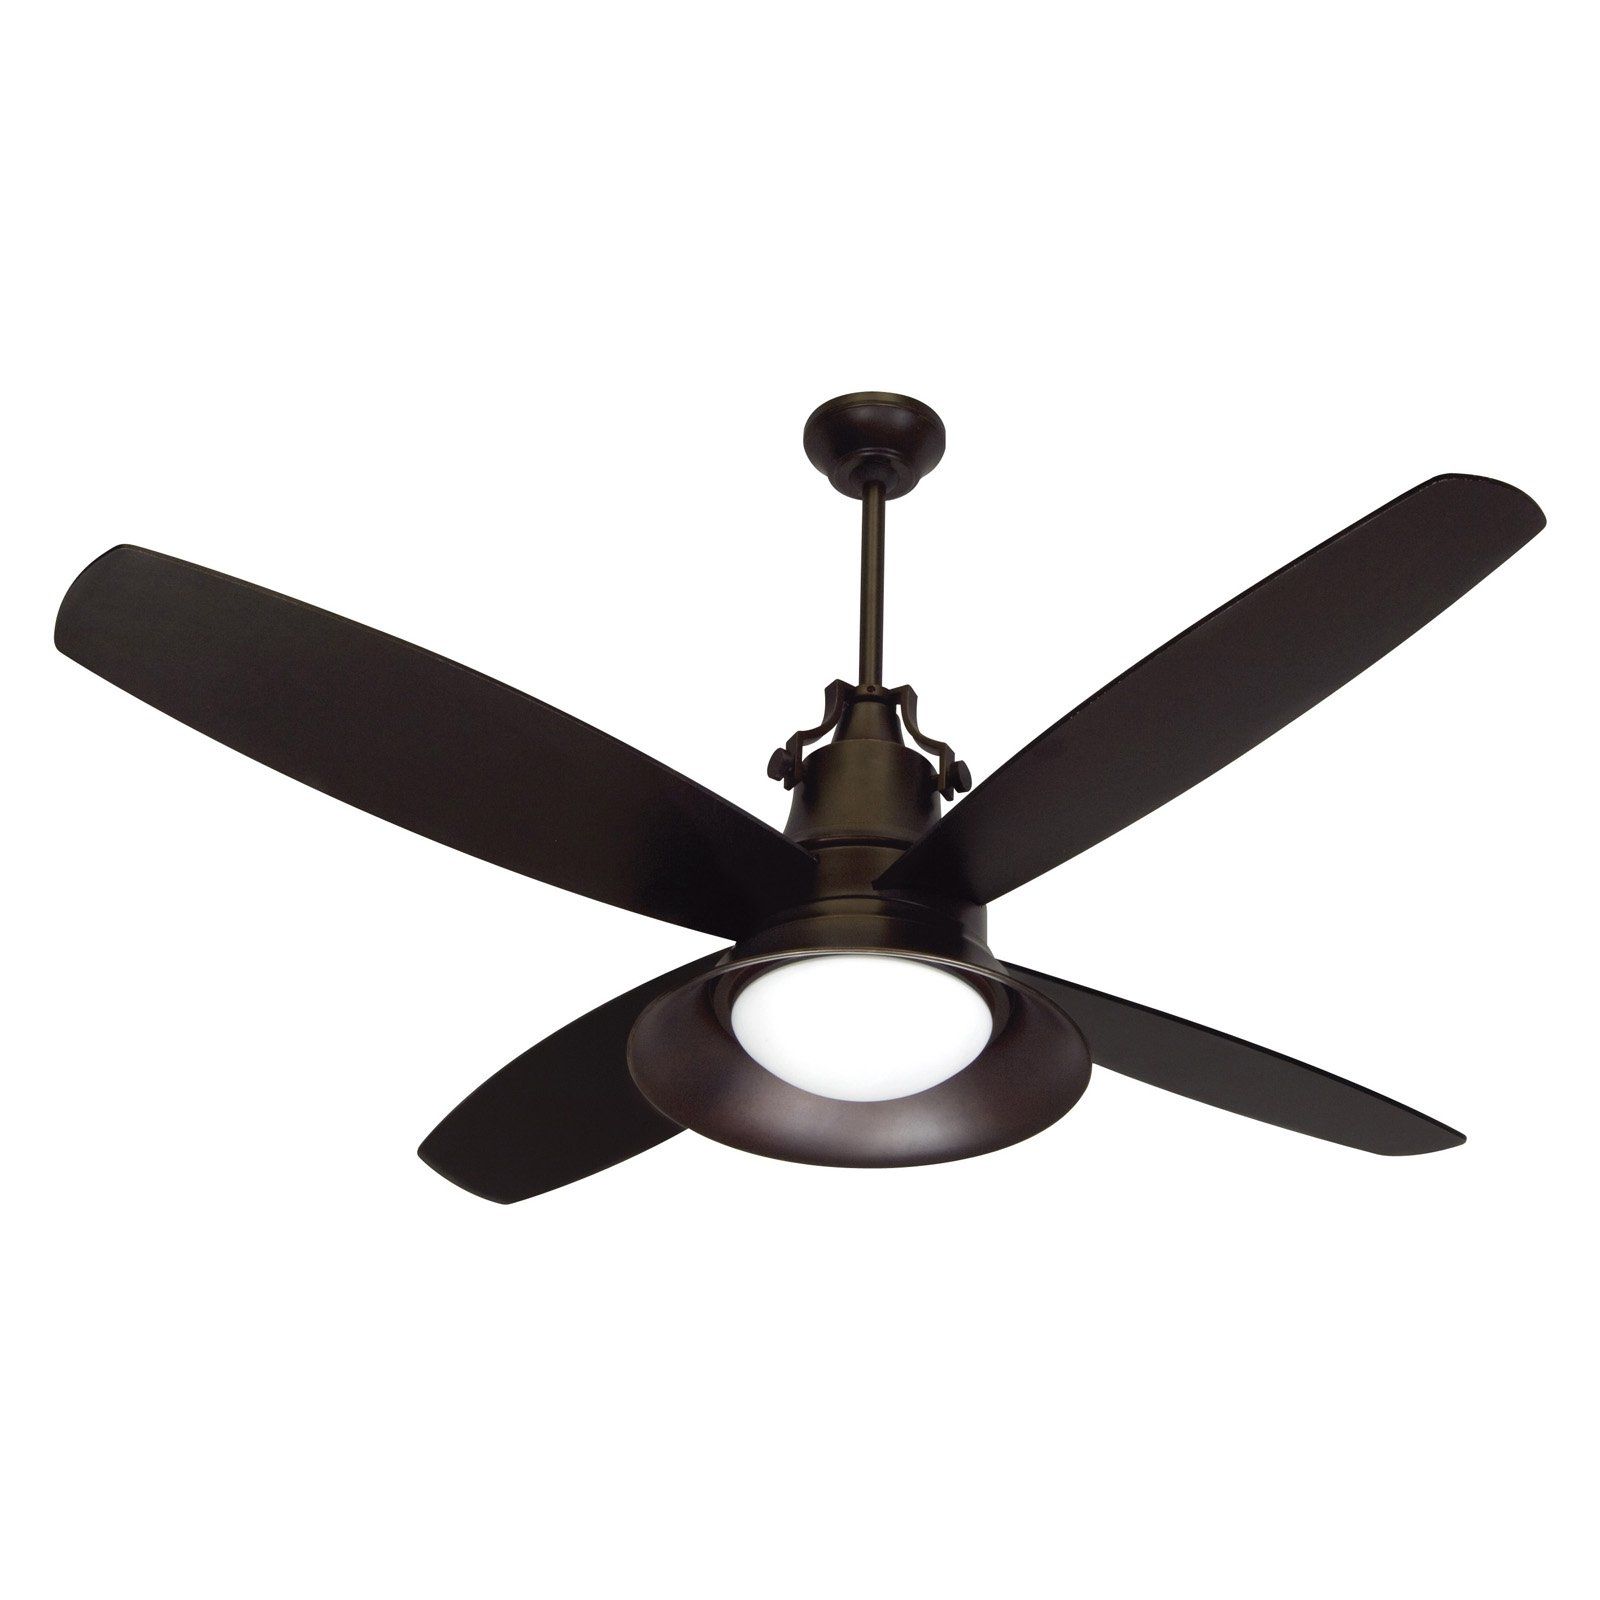 Most Recent Brown Outdoor Ceiling Fan With Light With Regard To Craftmade Un52obg Union 52 In (View 11 of 20)